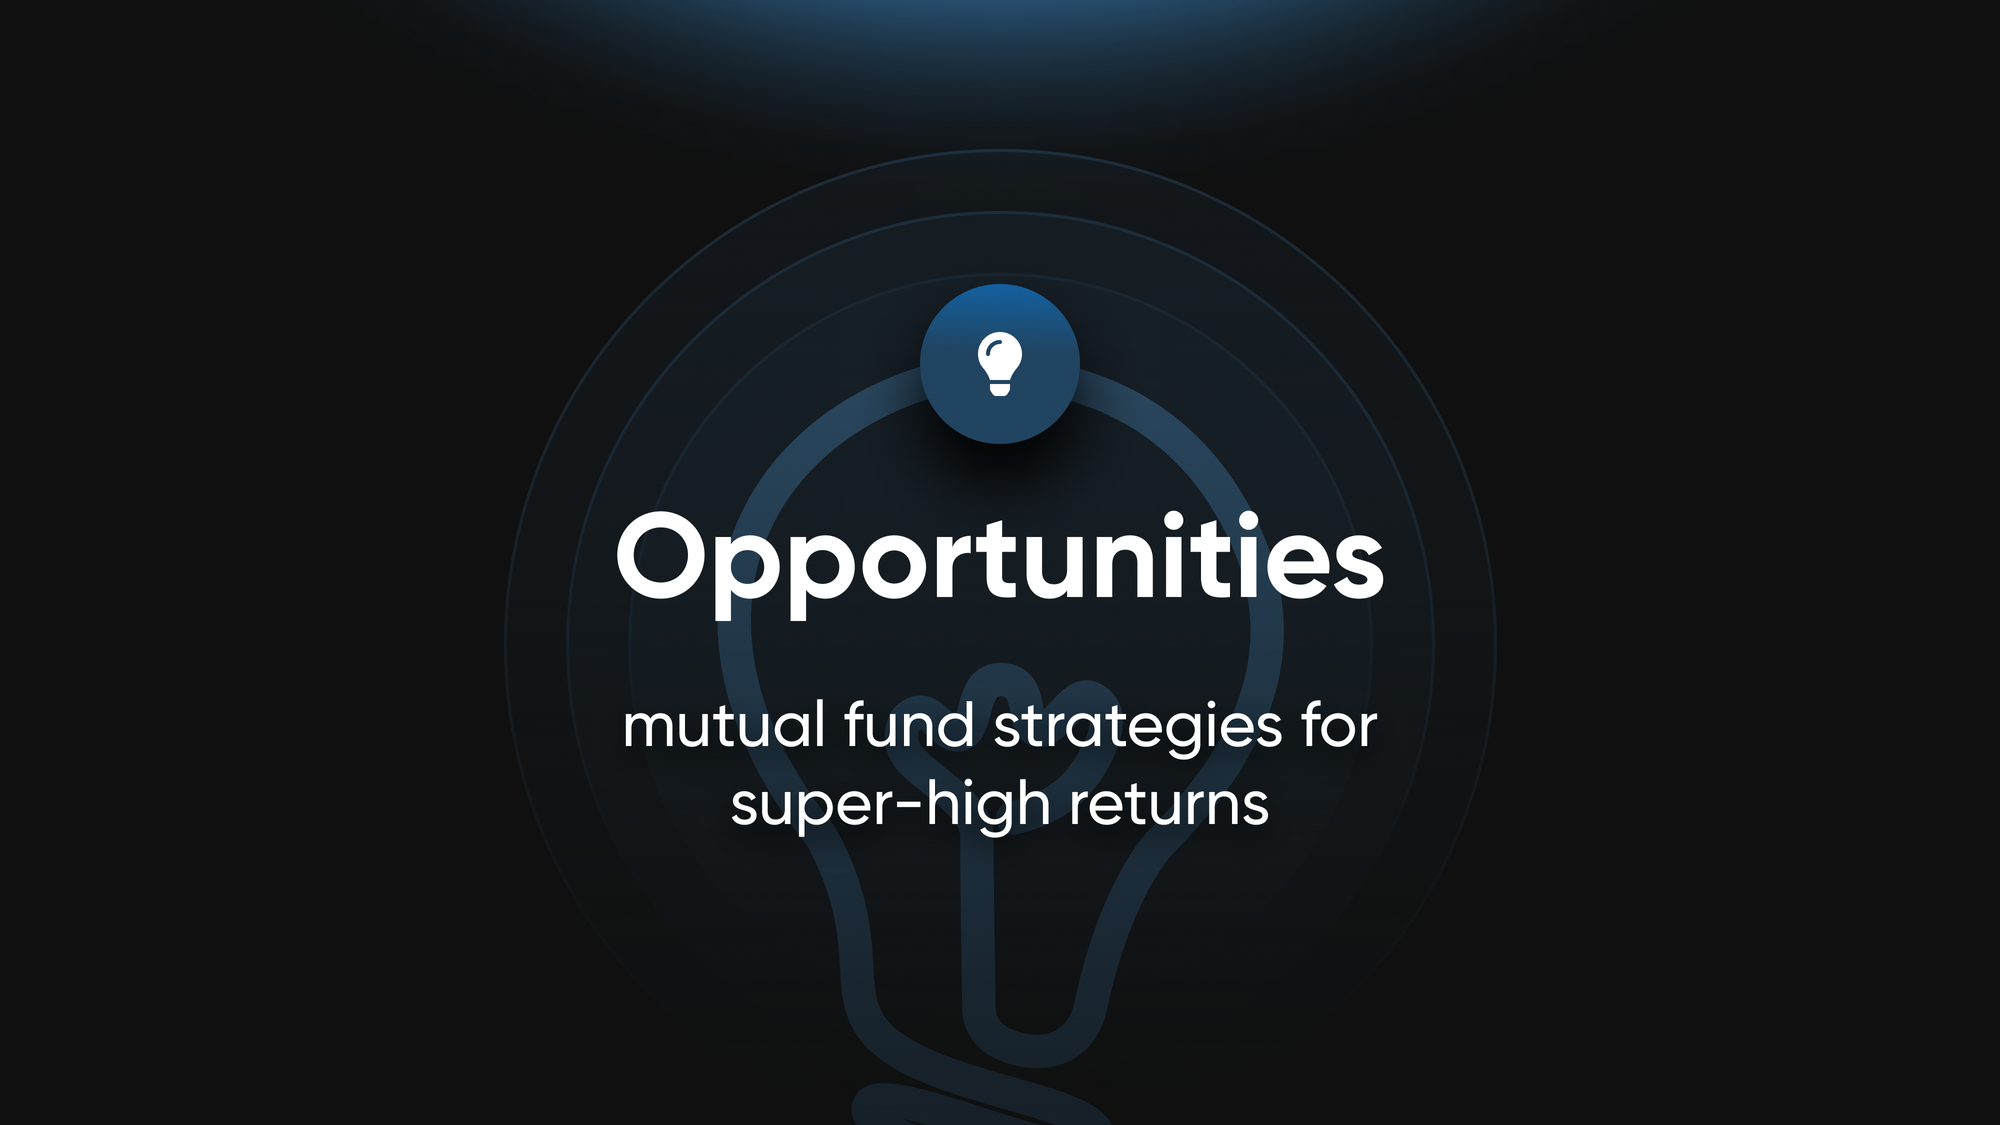 Opportunities: Mutual fund strategies for super-high returns